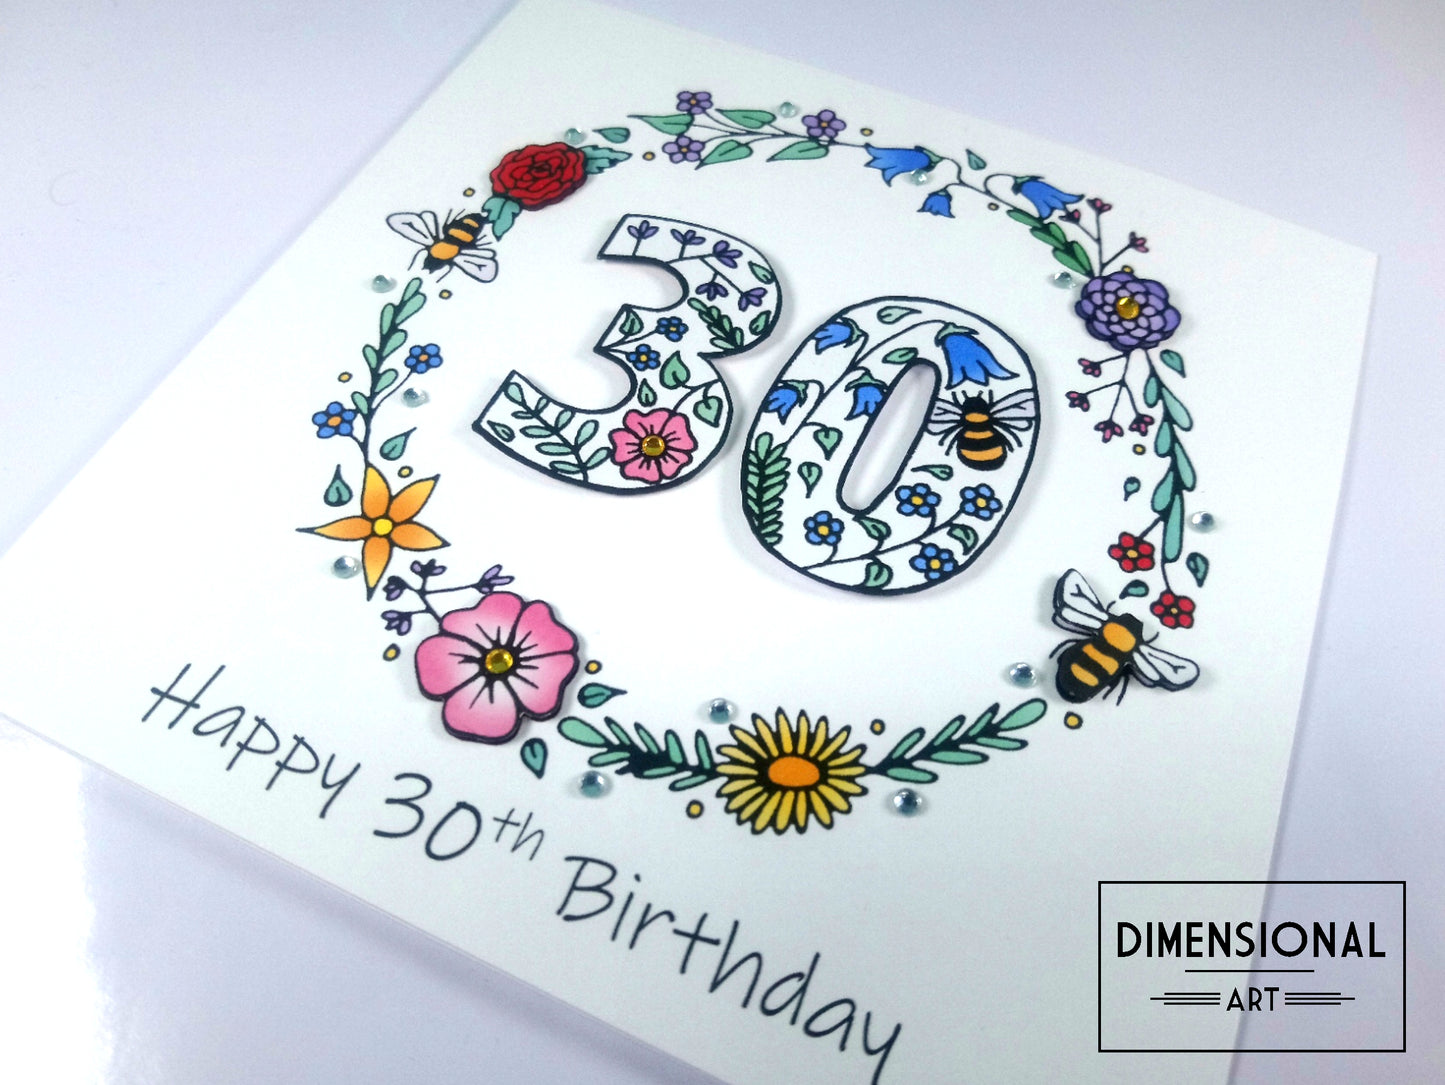 30th Flowers and Bees Birthday Card